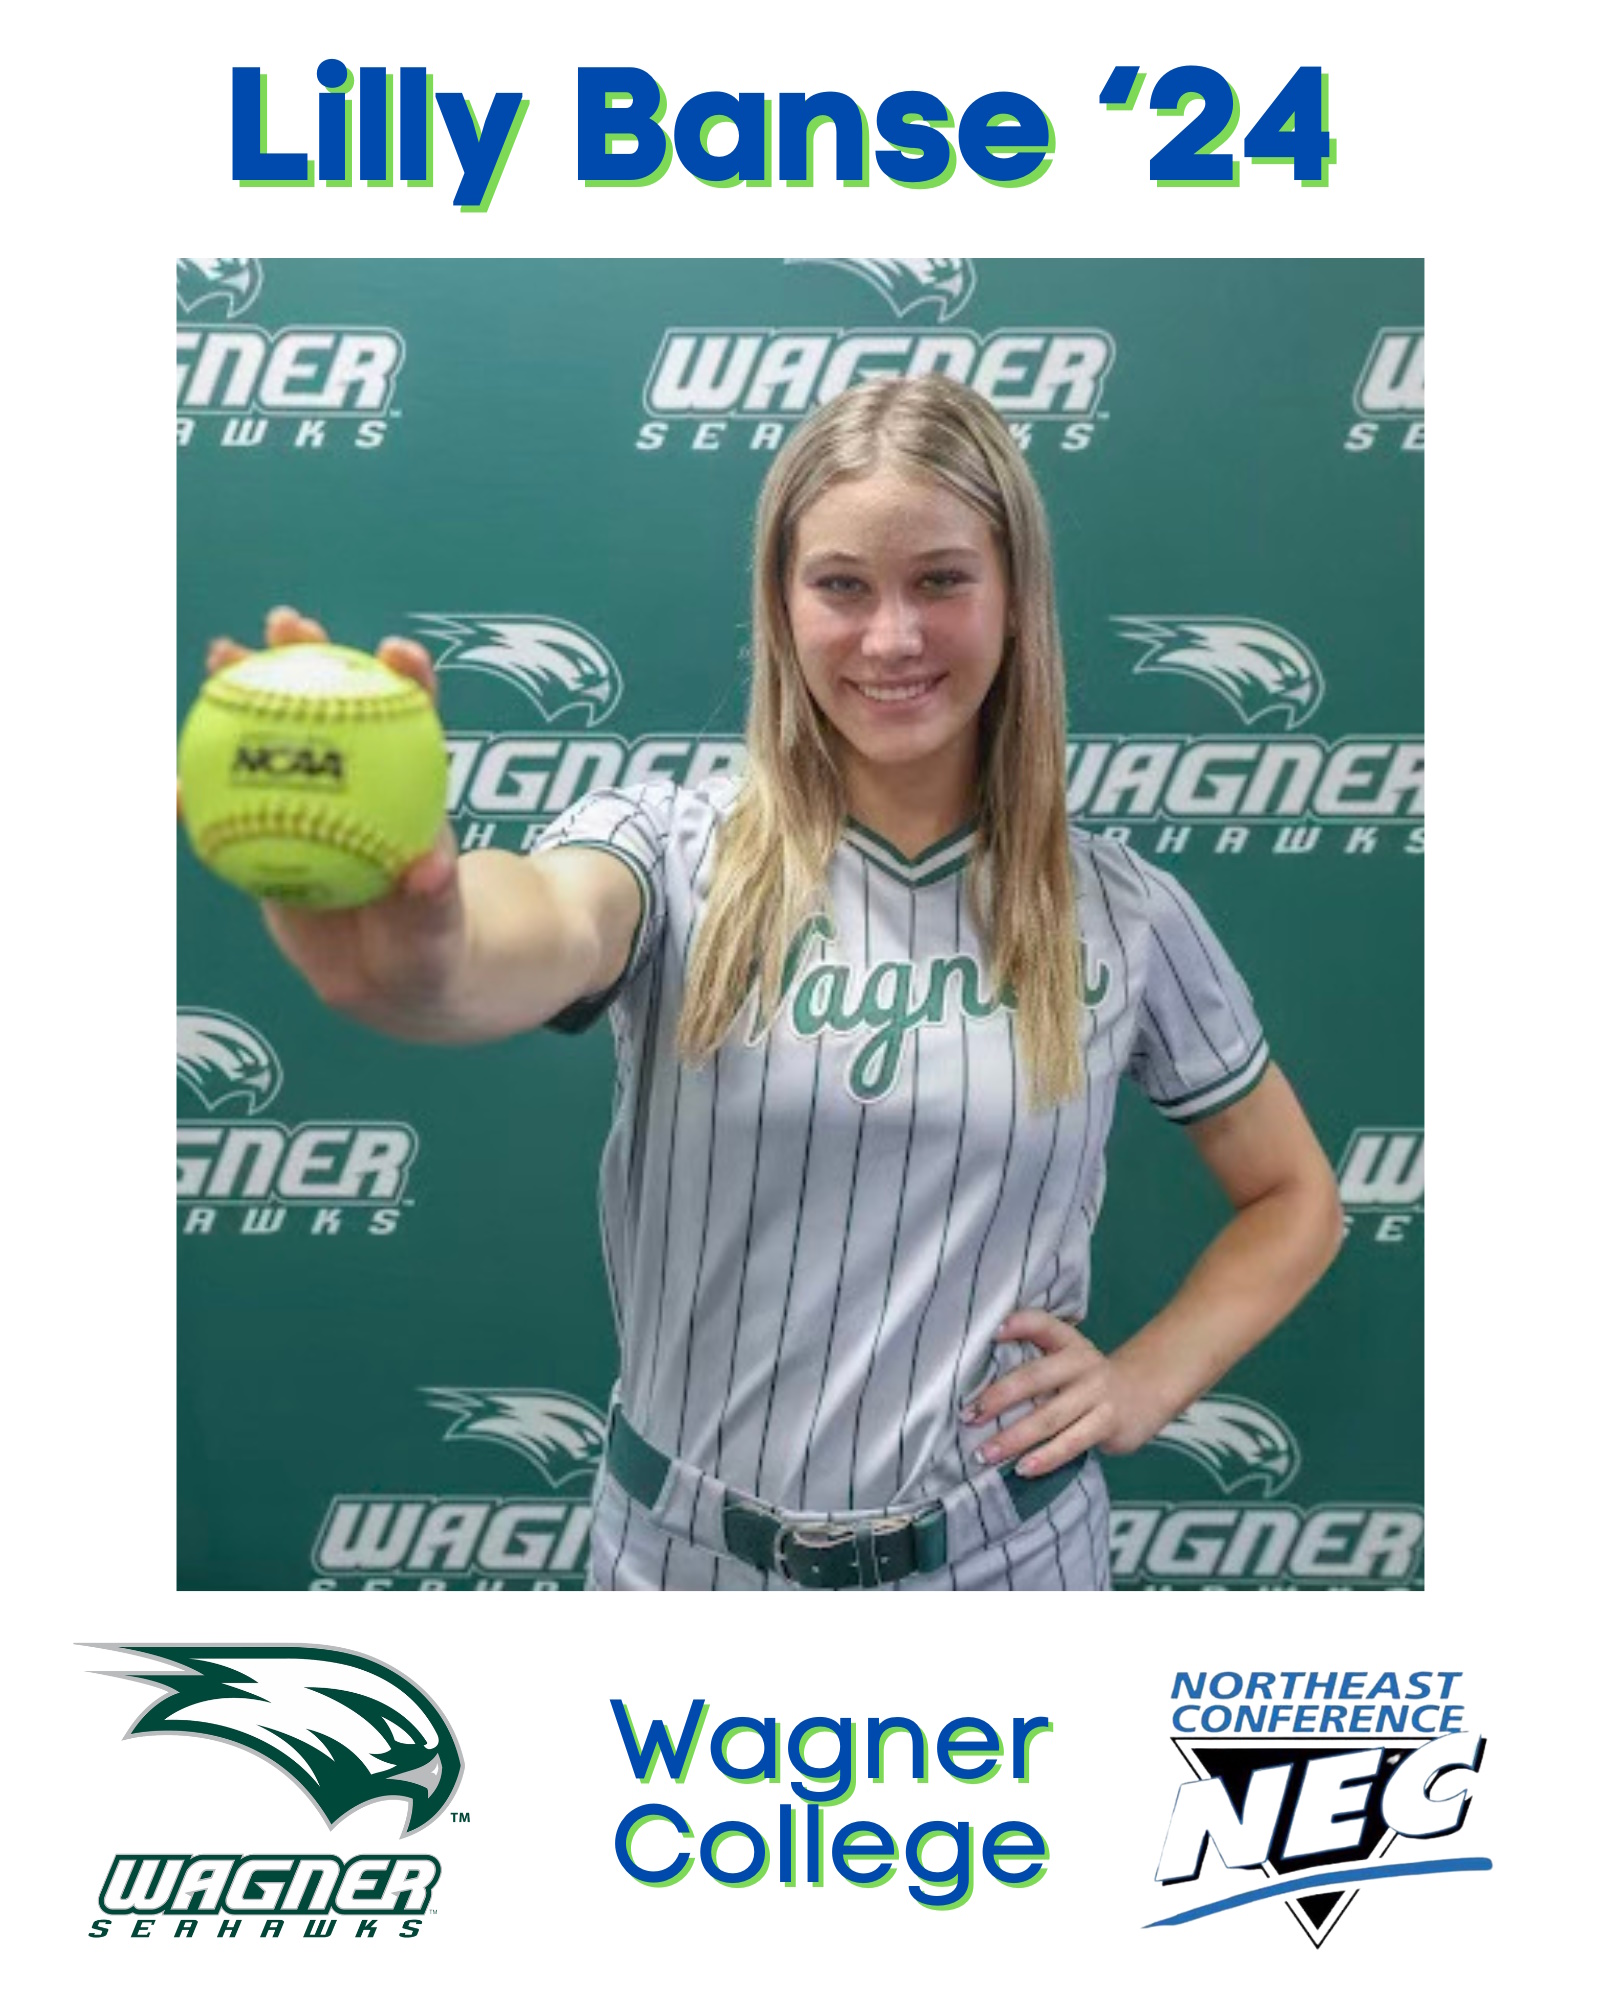 Lilly Banse - Wagner College